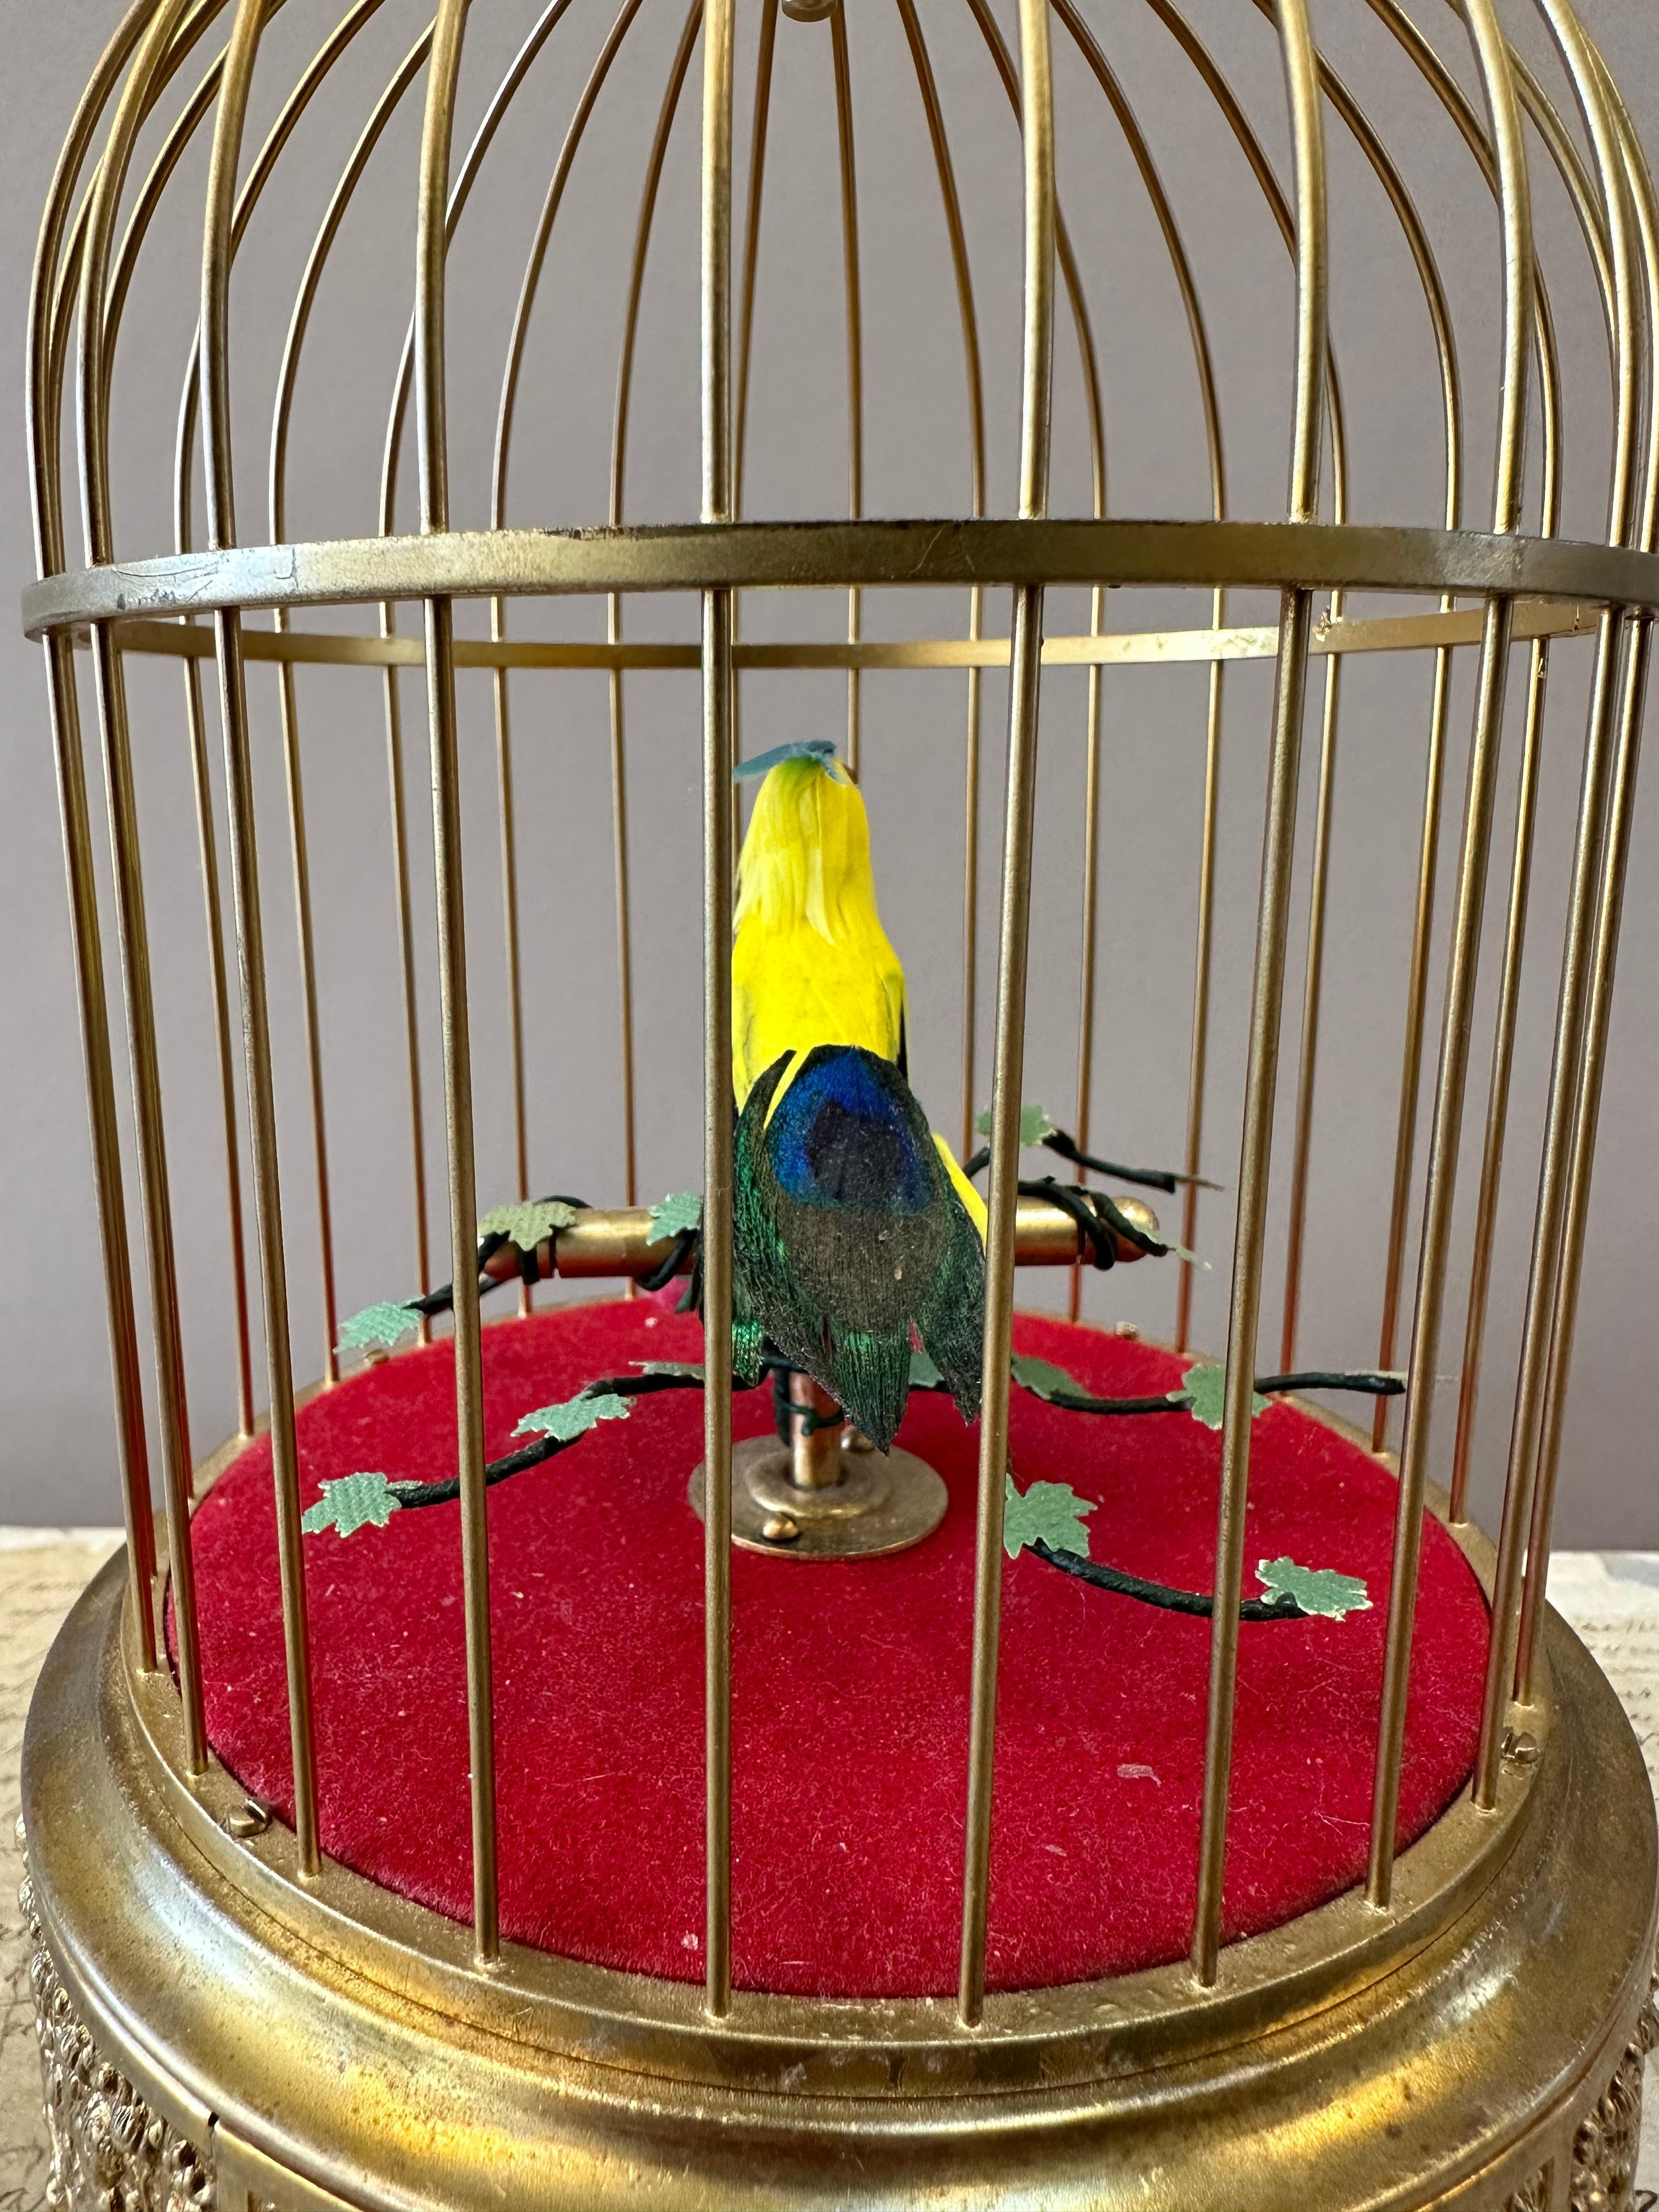 Early 20th Century Musical Bird Automaton. An automated singing bird with a strong voice and flamboyant plumage amidst foliage in a gilded brass cage. France, circa 1930.